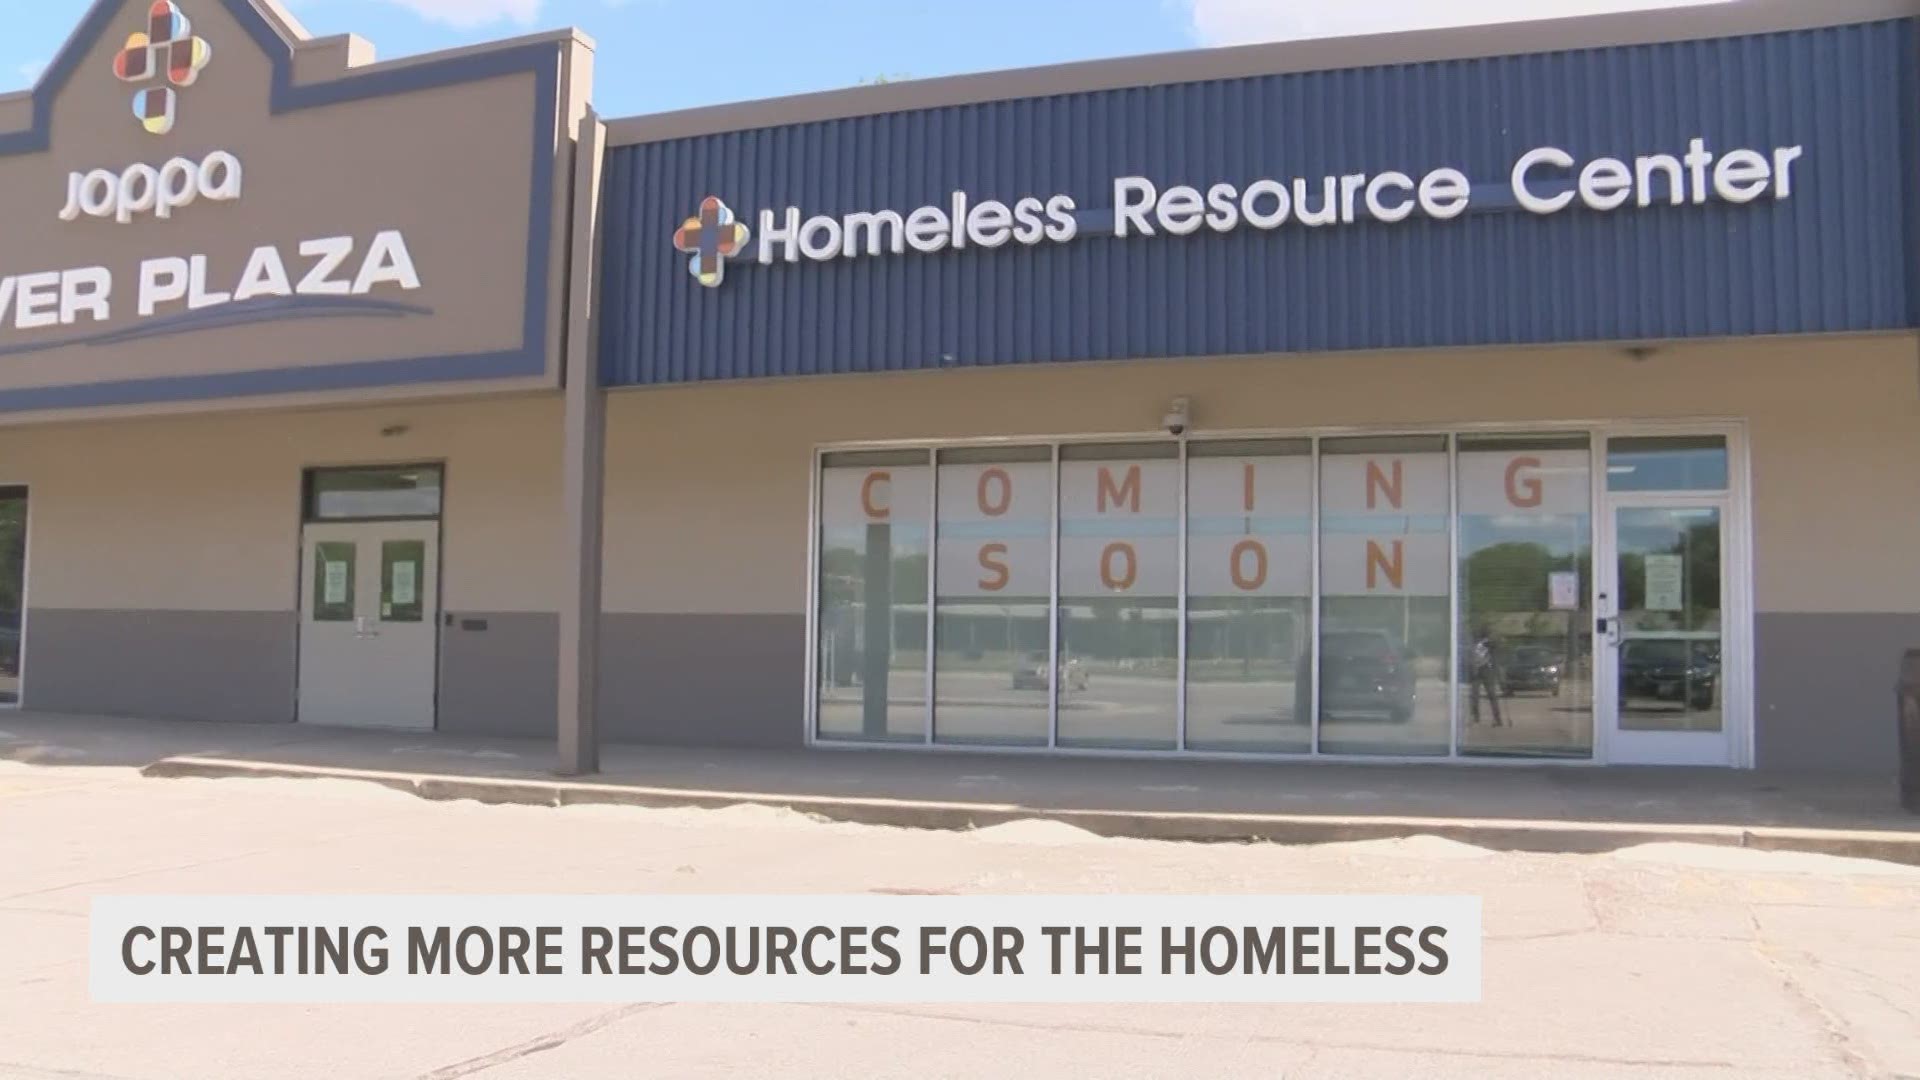 Joppa will open a Homeless Resource Center this summer. It will give homeless people a place to eat, somewhere to use the bathroom and connect them with resources.